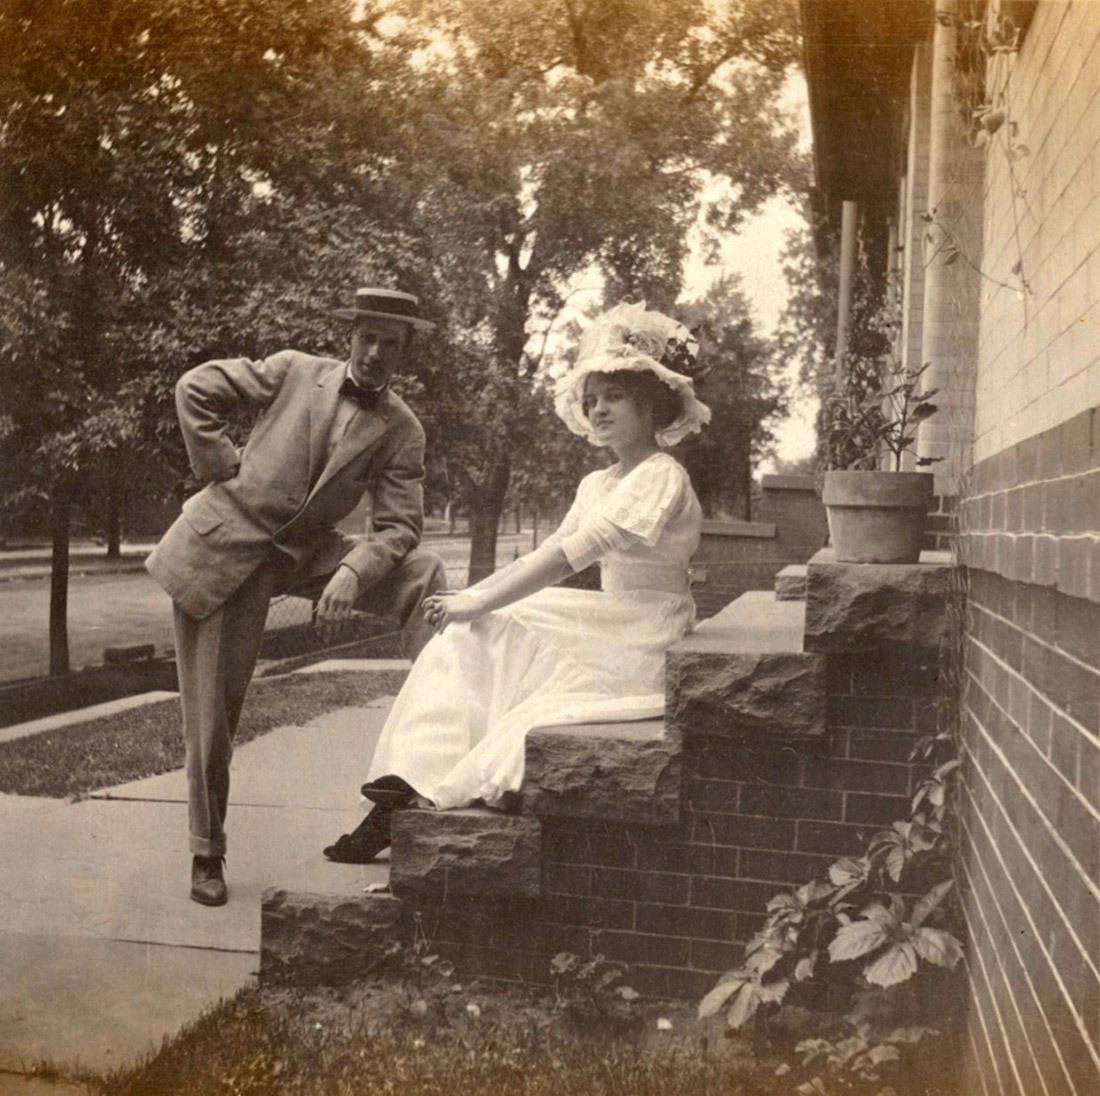 These are stylish cousins George Engel and Lea Penman in 1912 Denver CO. Lea went on to have a stage and screen career. She died in 1962.